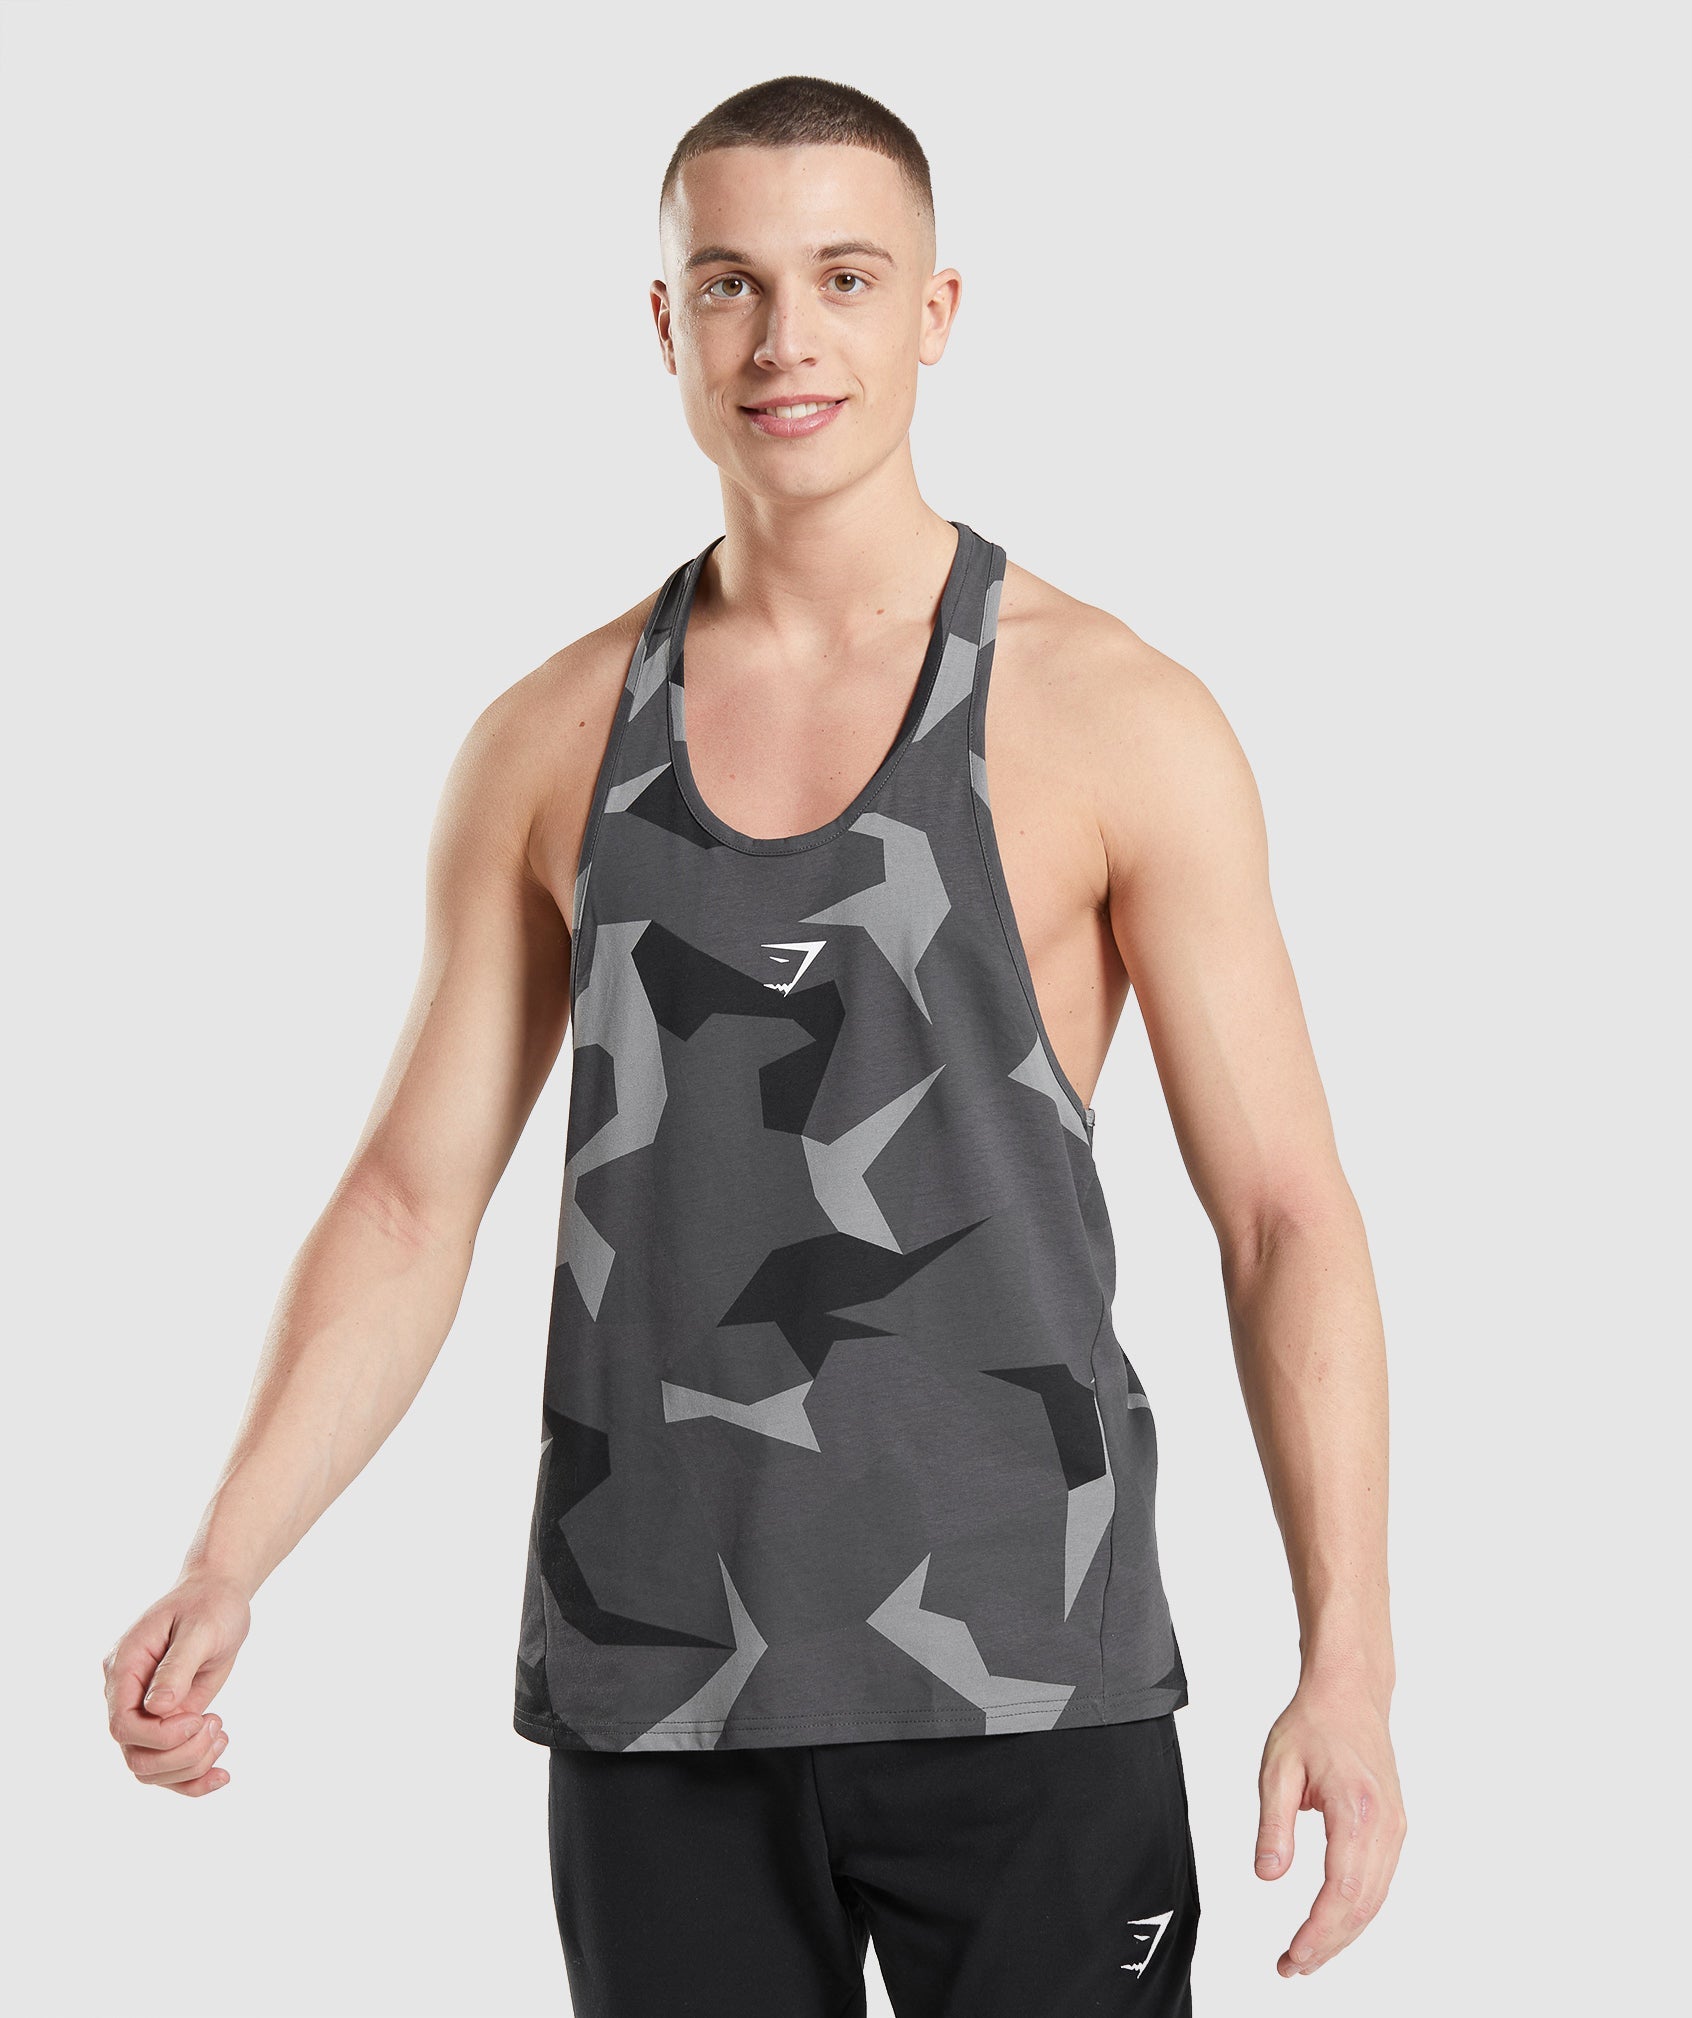 Choose the Right Gymshark Stringer for Your Workout, by Ricky Gin